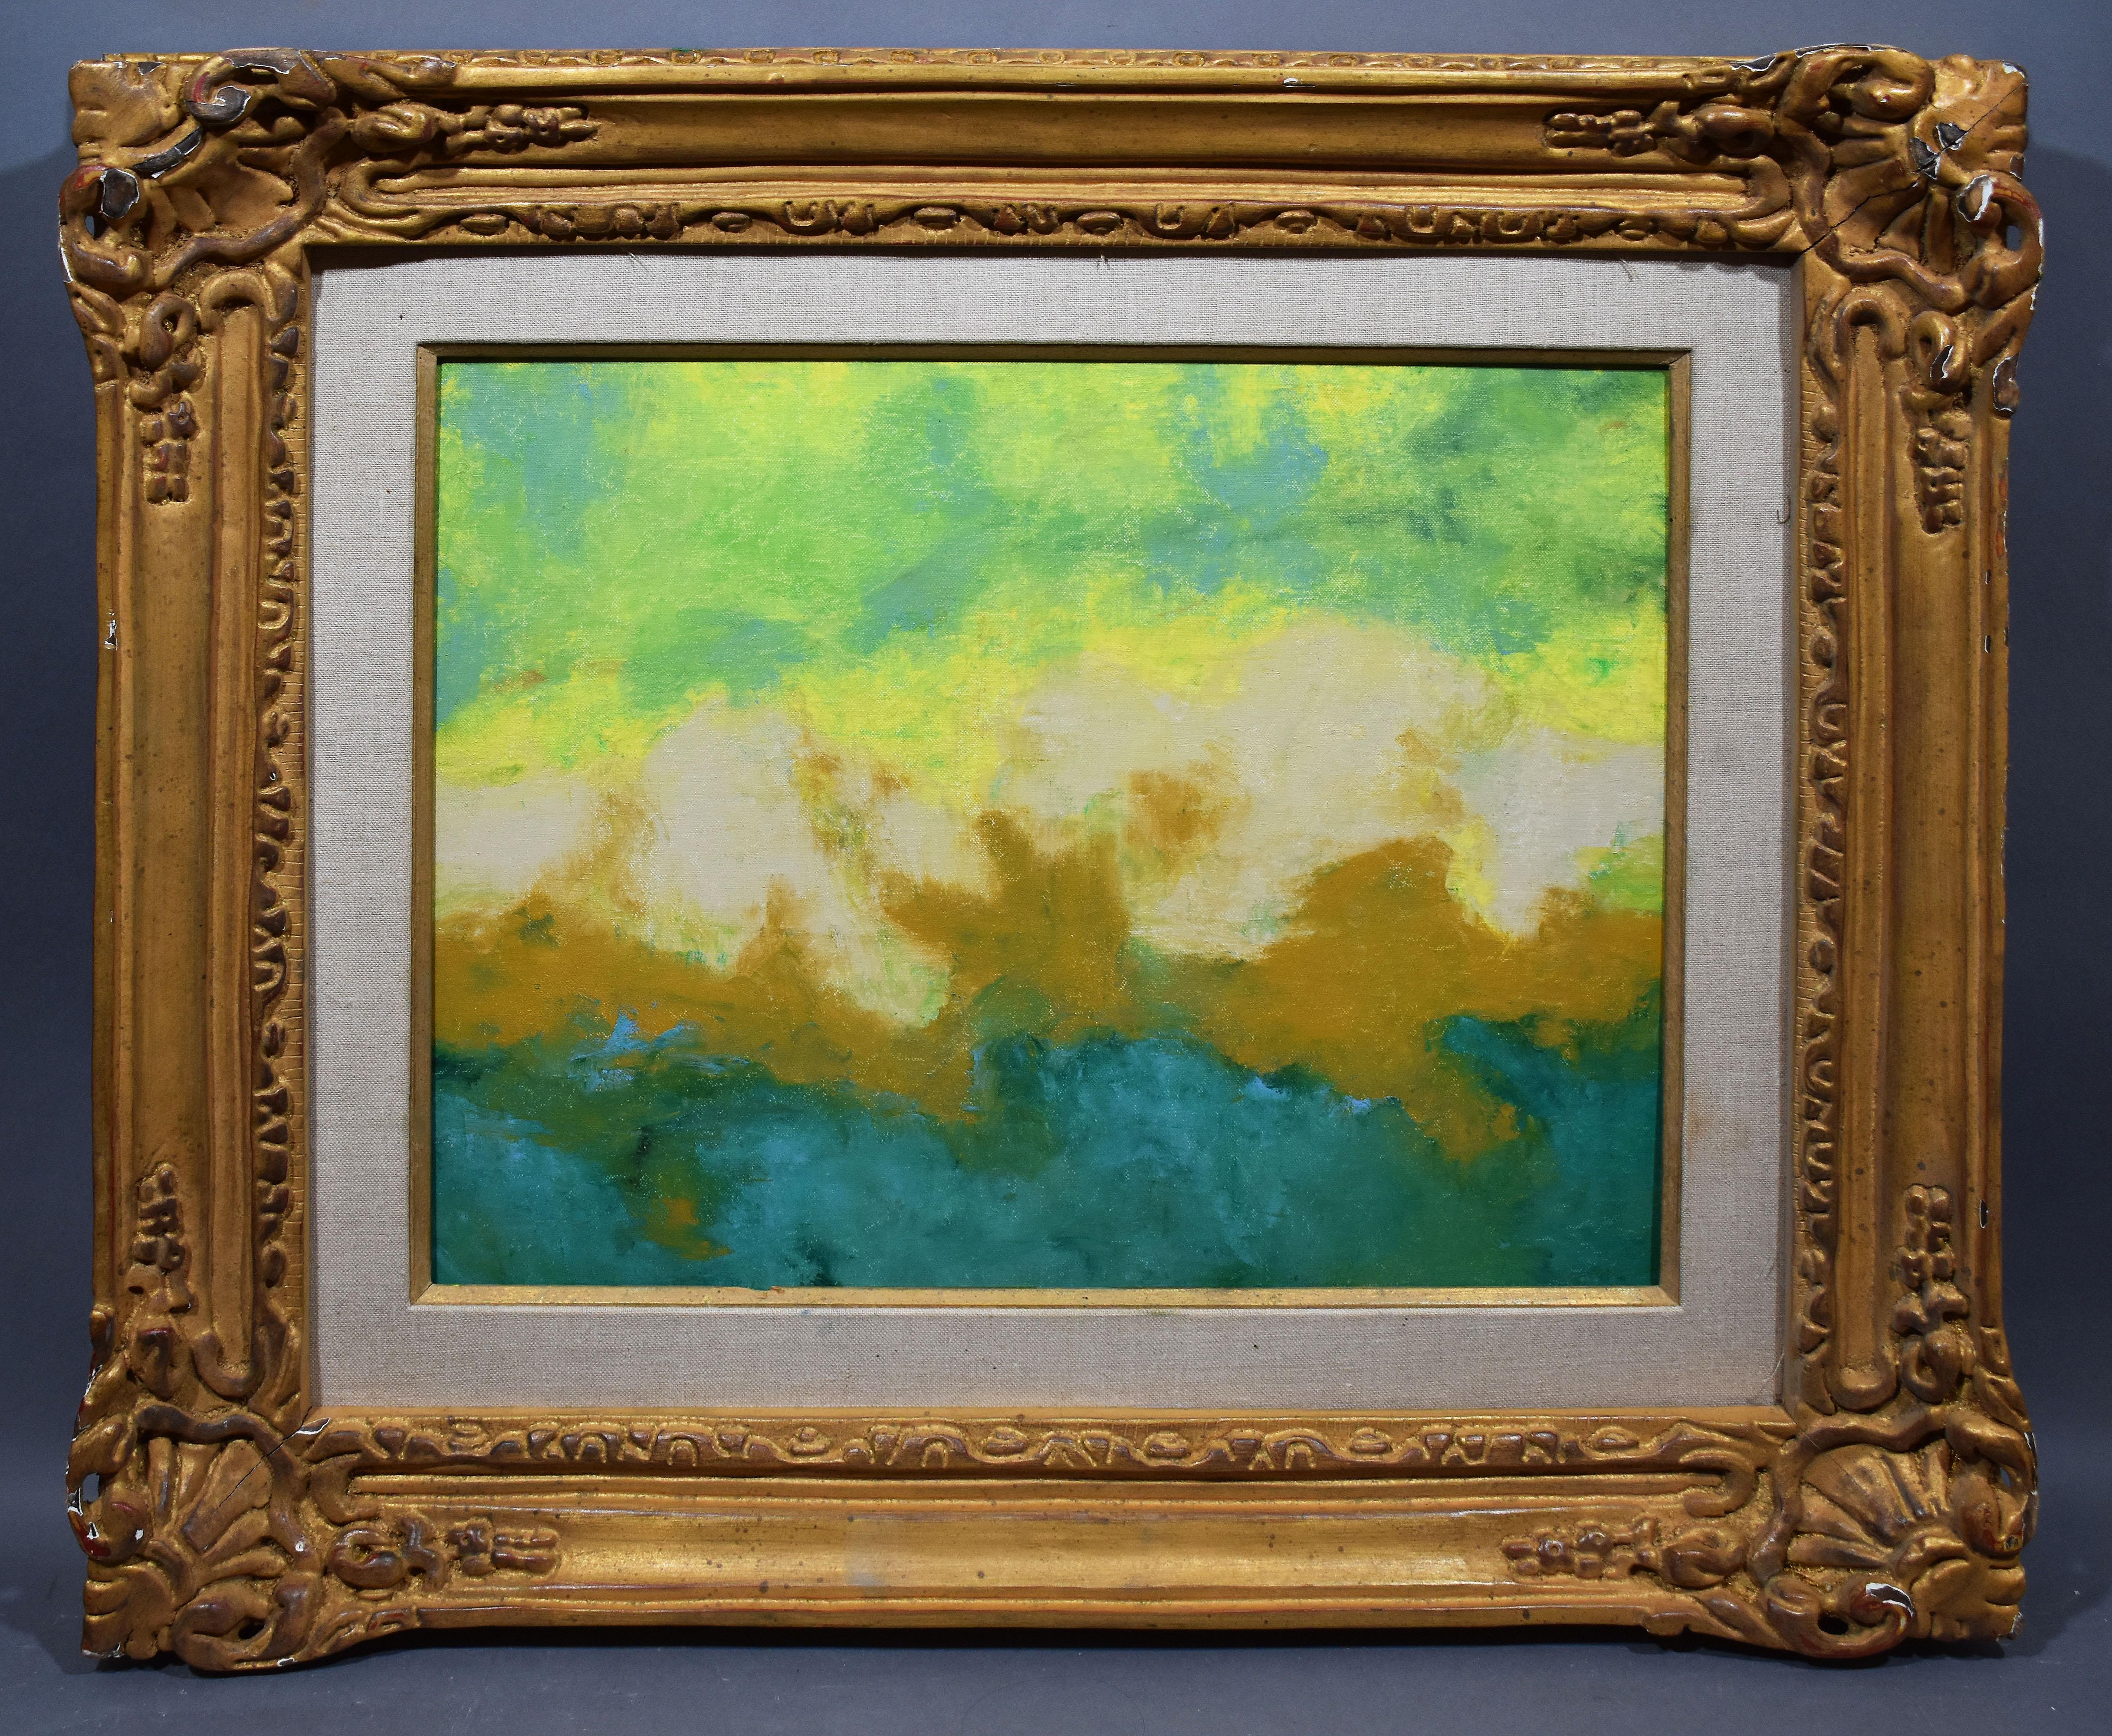 Modernist abstract landscape painting by Abraham Pariente.  Oil on board, circa 1980.  Signed on verso.  Displayed in a modernist frame.  Image size, 21.5